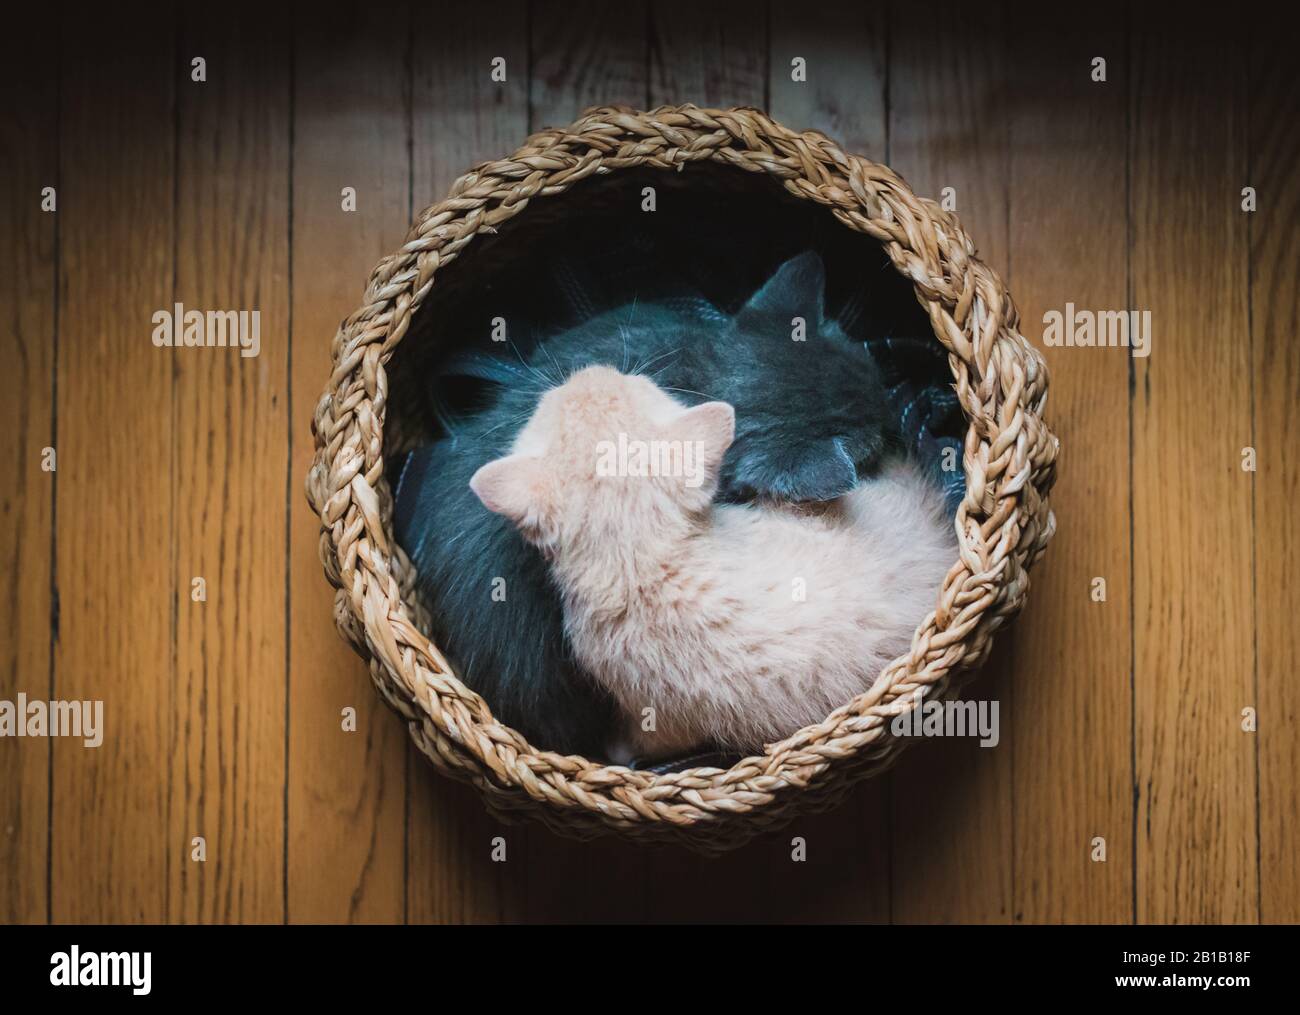 Two kittens curled up asleep together in a basket on the floor. Stock Photo